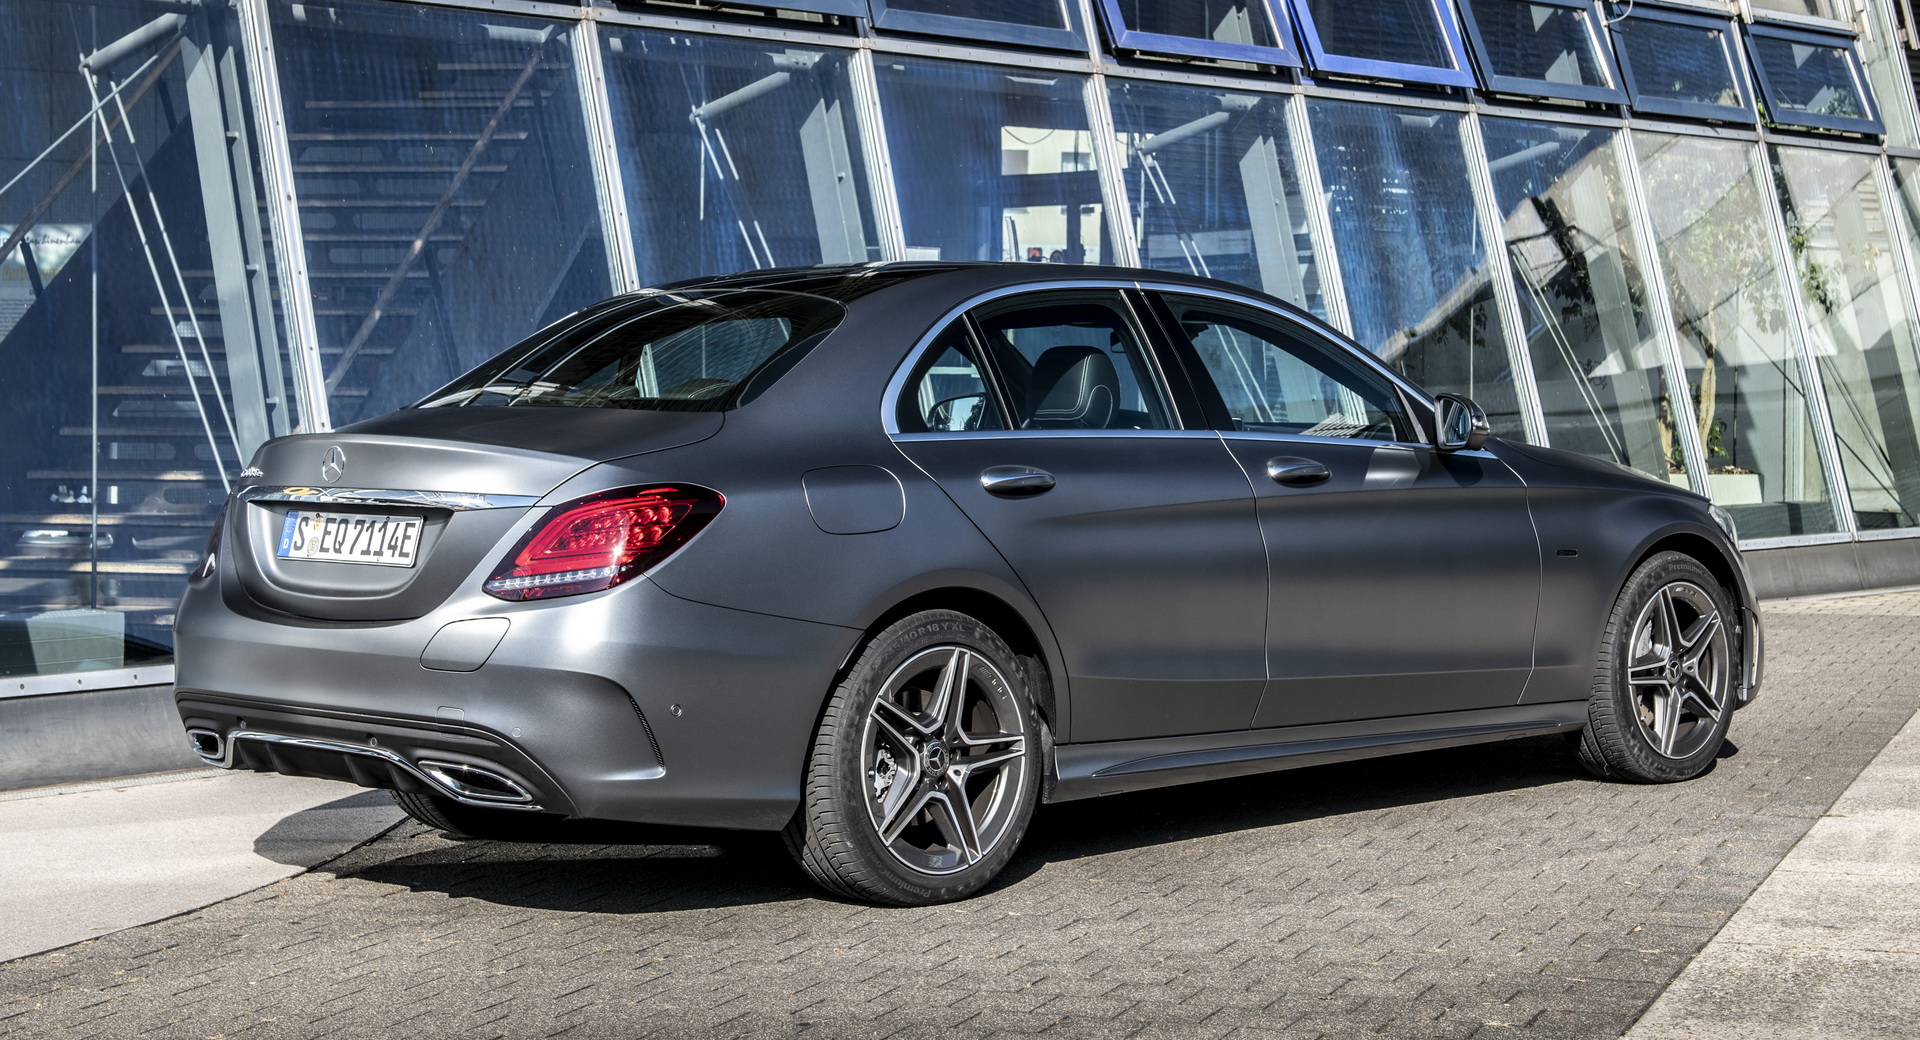 https://www.carscoops.com/wp-content/uploads/2020/10/mercedes-c-class-w205-4-reasons-not-to-buy-13.jpg